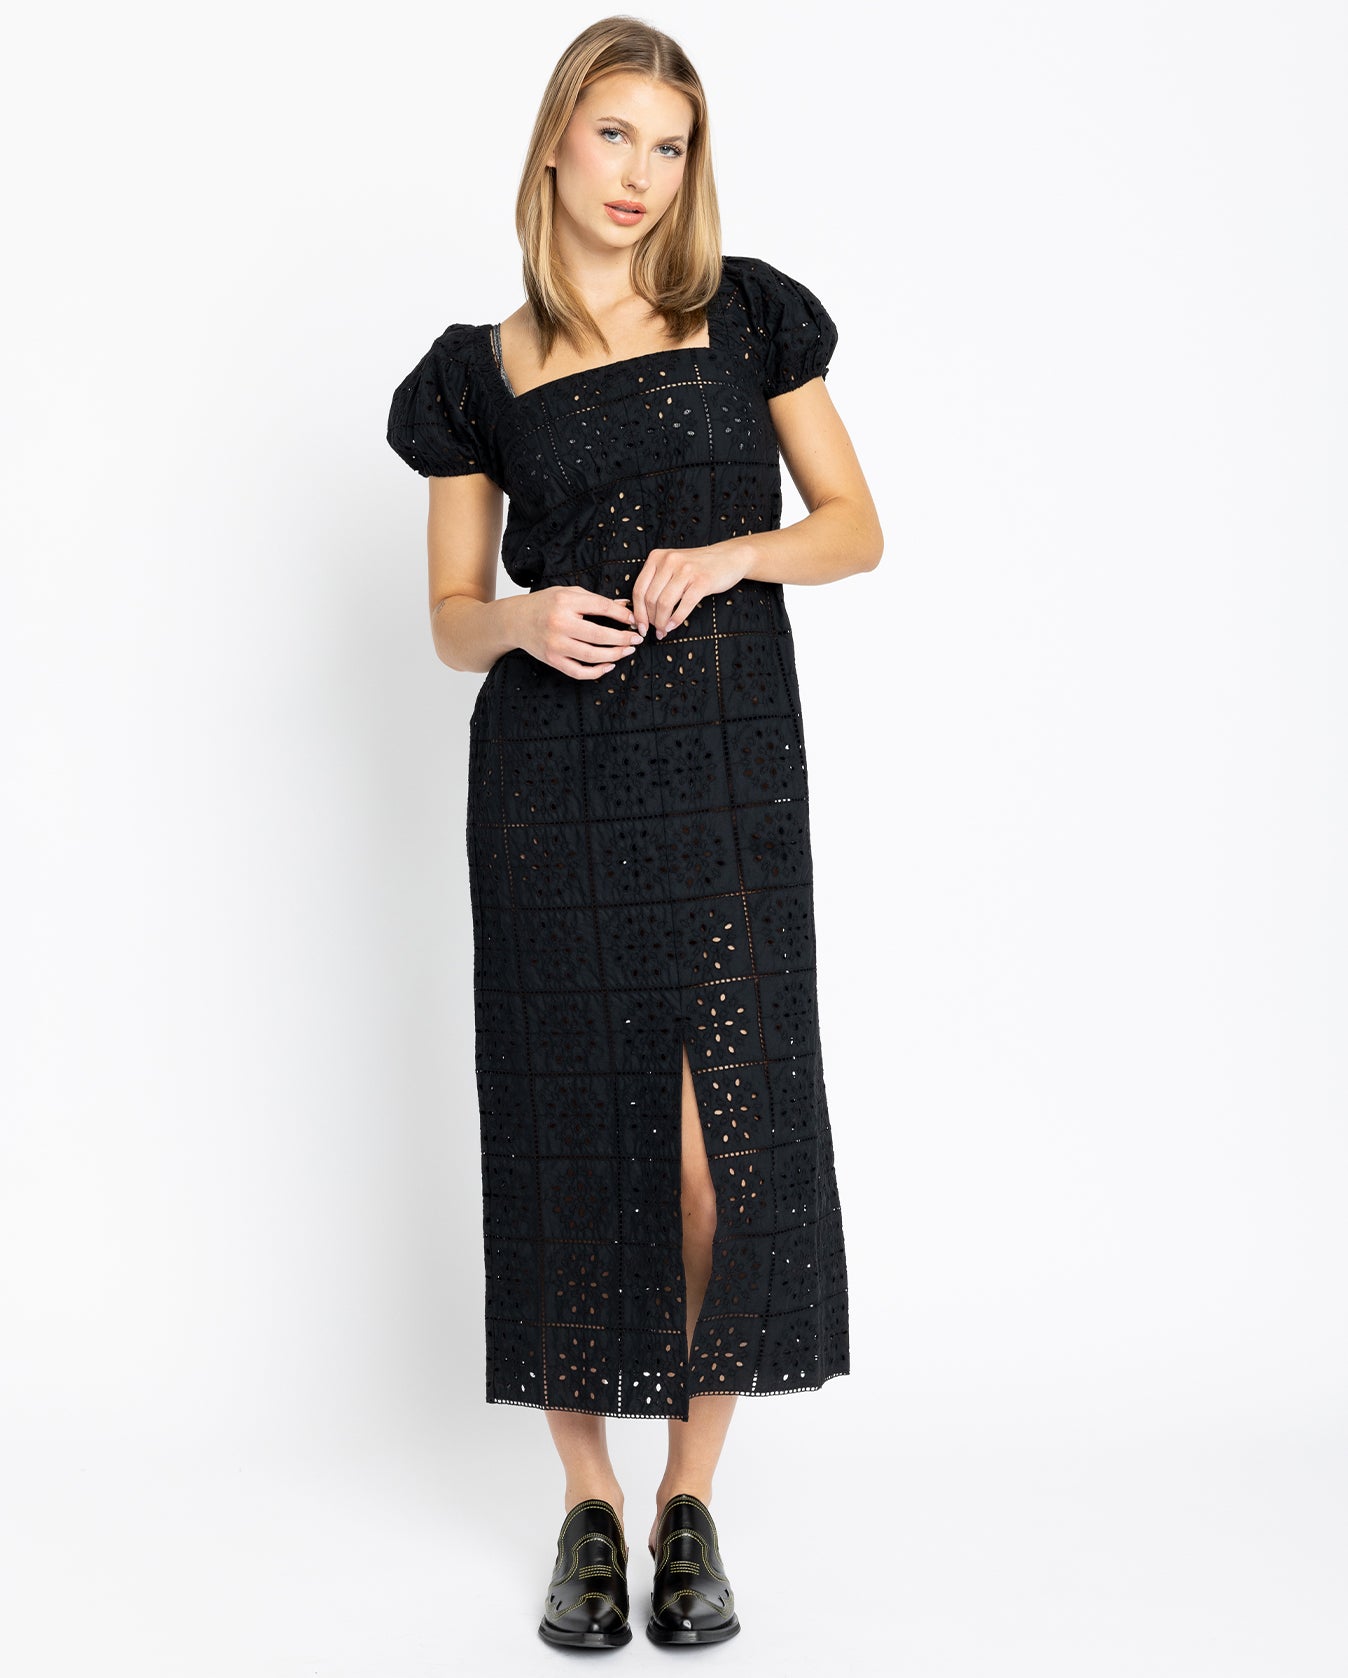 broderie anglaise dress